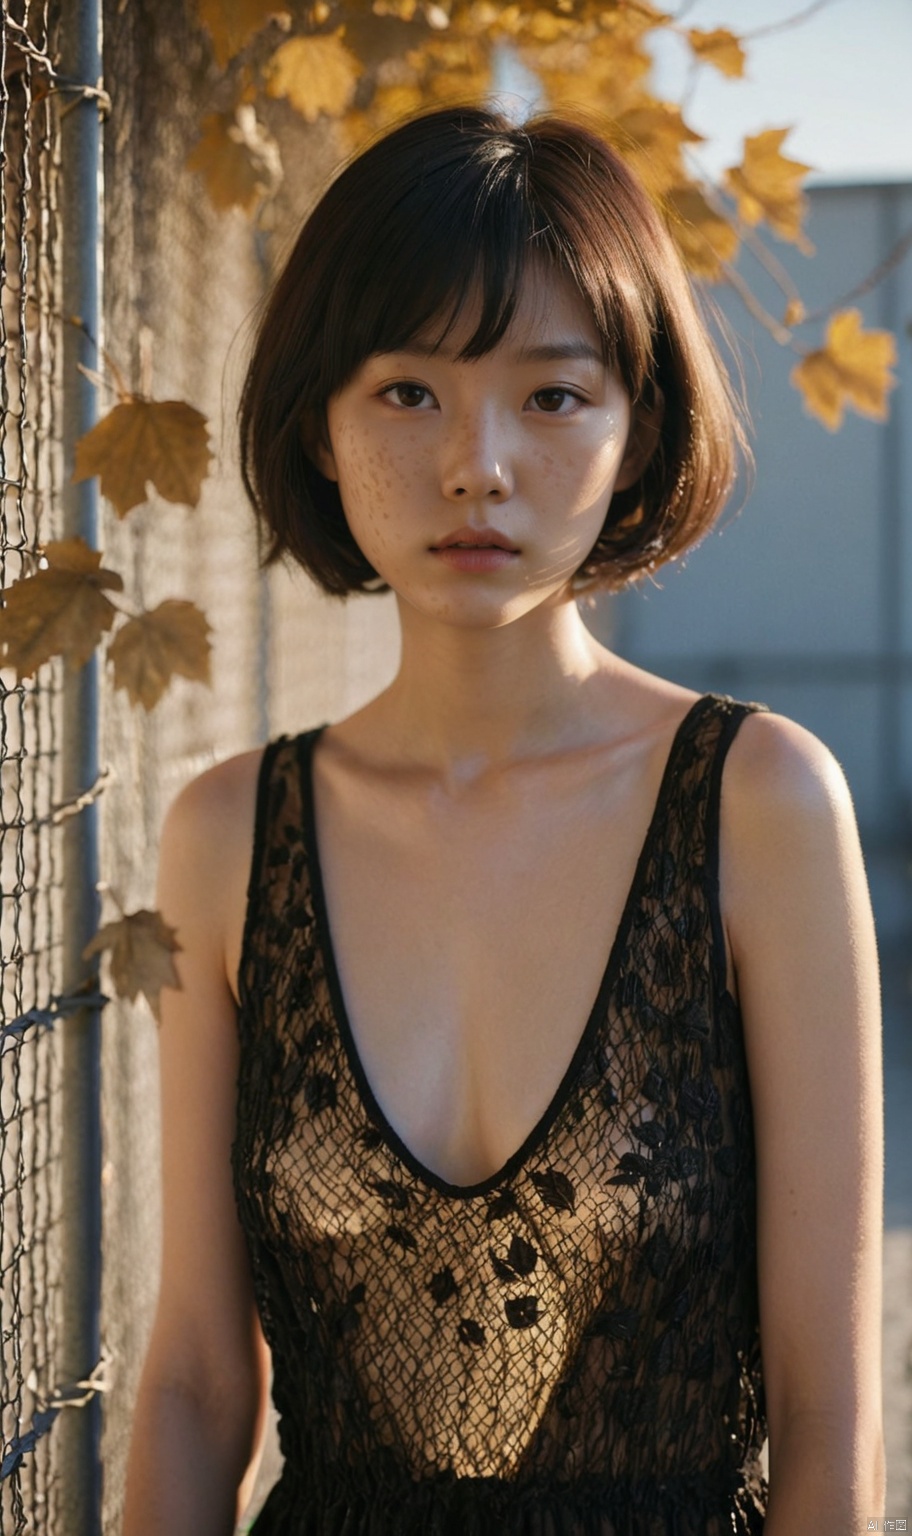  Photographer Toshio Sato's shooting style features fresh Japanese tones and Fuji cameras,with a 35MM lens. In the setting sun and golden moments,a bust of a young girl is captured in close-up shots with short hair and melancholic gaze. The black camisole dress (obstructed composition with blurred leaves in the foreground:1.6),the girl leaning against a barbed wire mesh (mottled light and shadow, clear focus, sharp image:1.6),emotional and atmospheric,with a golden realistic style. Portrait photography features lens flares,